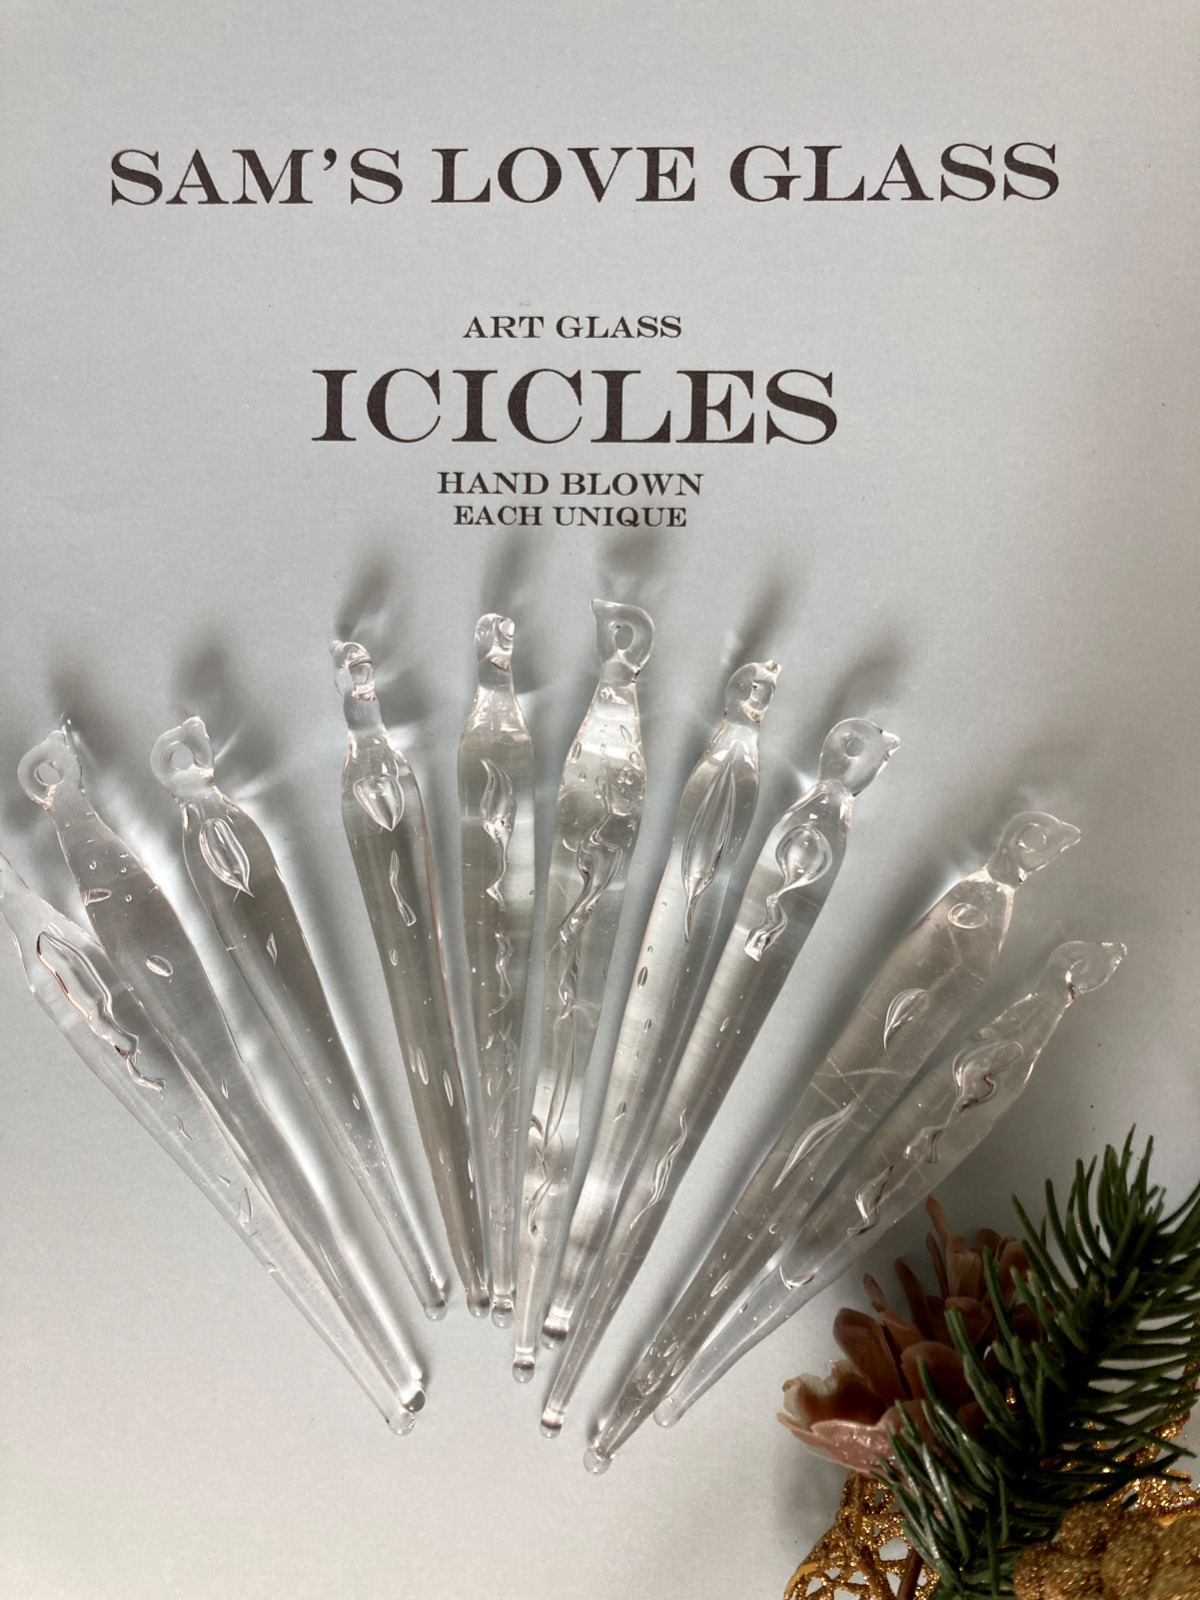 Glass ICICLES Christmas Tree Ornaments Hand Made  Blown Unique Set 10 NEW w Box